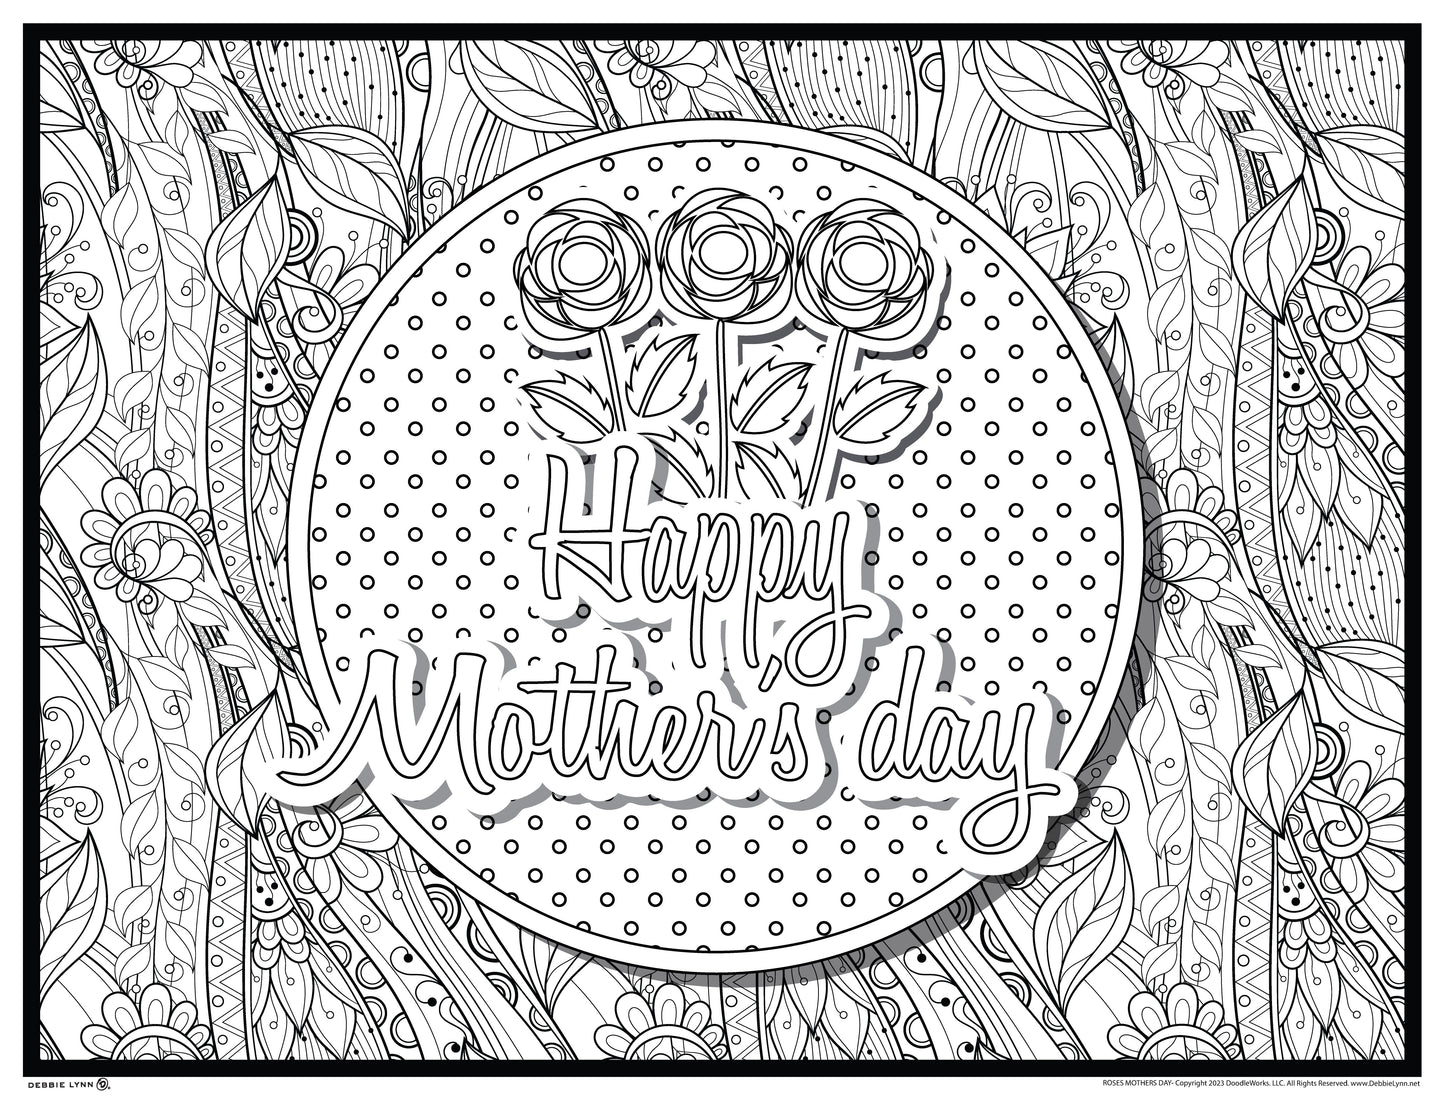 Roses for Mom Mothers Day Personalized Giant Coloring Poster 46"x60"